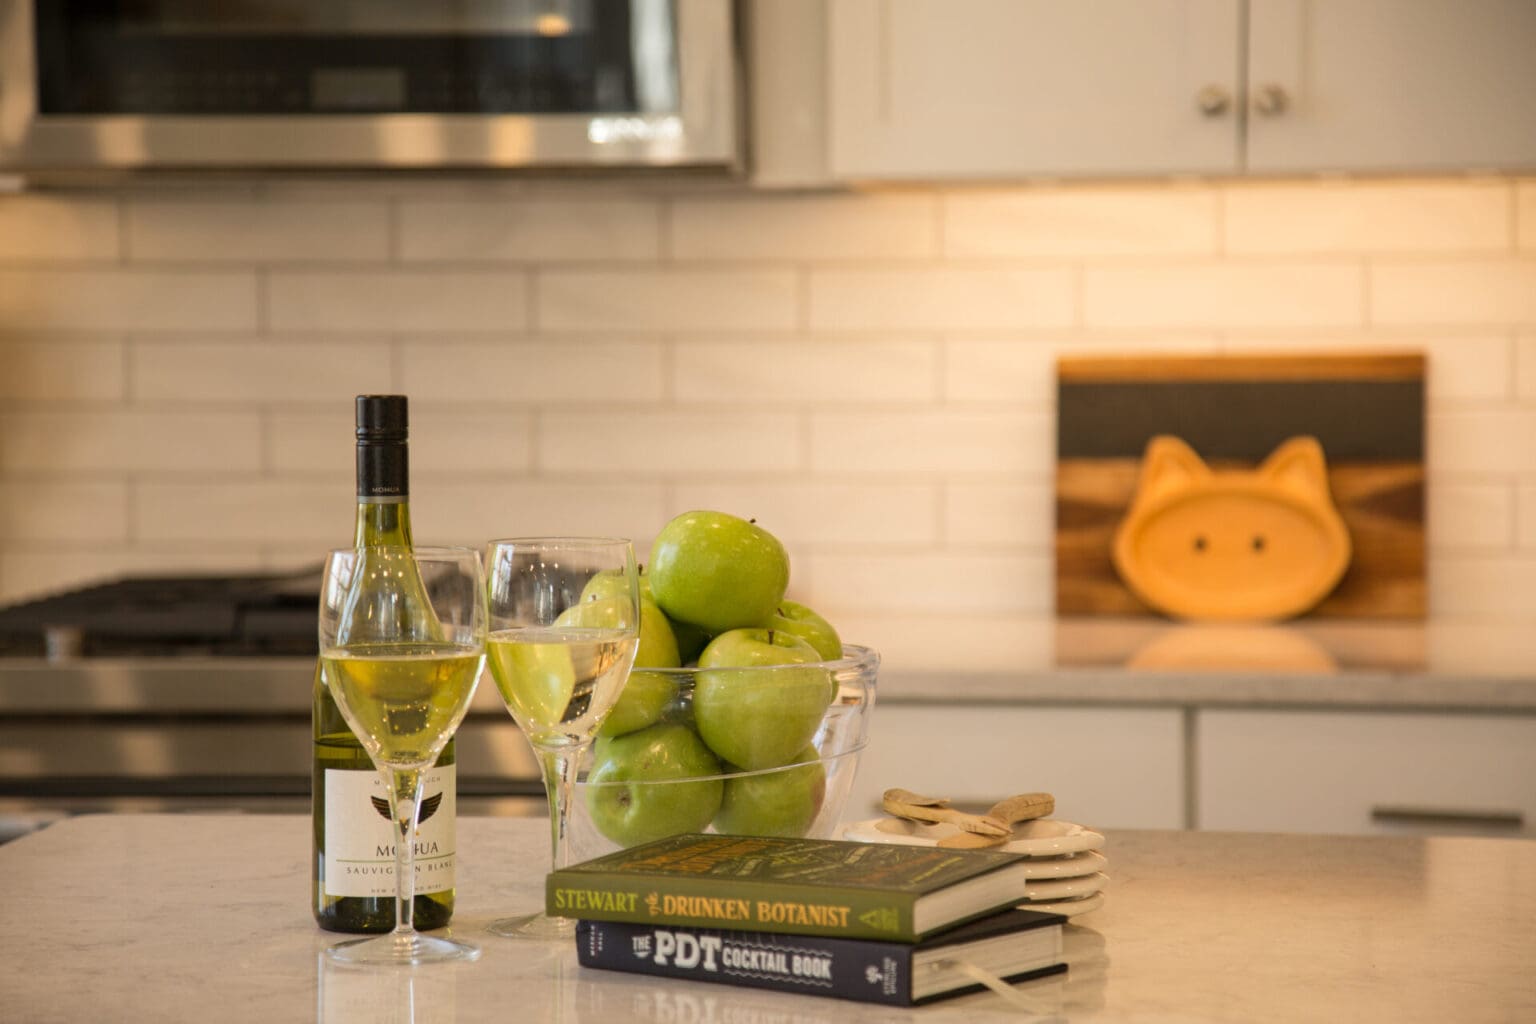 A photo of green apples in a bowl, cookbooks, and two glasses and a bottle of white wine in a kitchen with grey marble countertops.